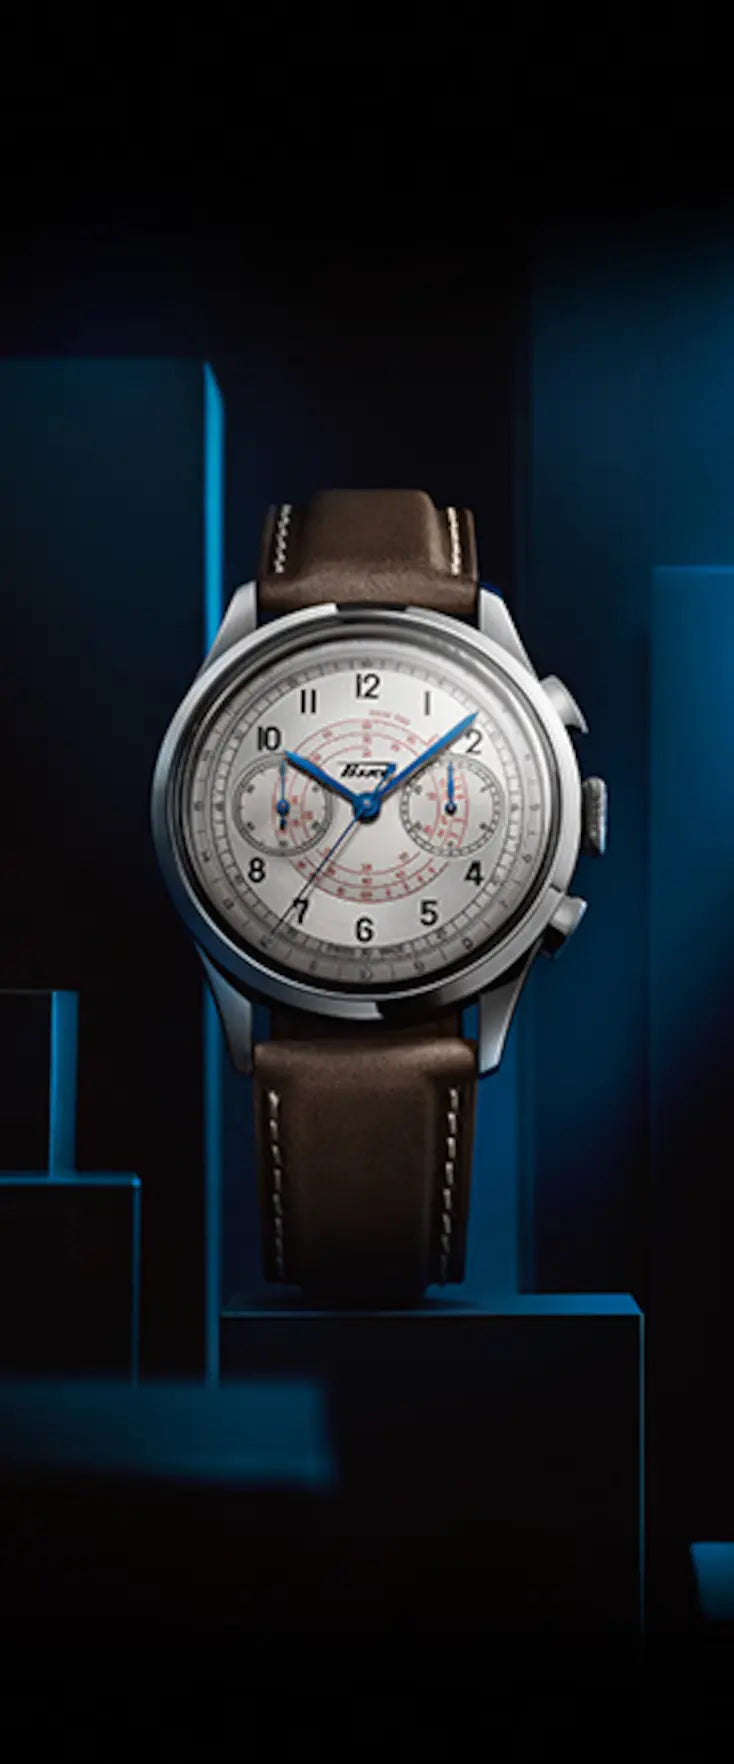 Tissot-category-homepage-heritage-classic.webp__PID:d075c861-9718-48cd-b344-adfb185a72fa